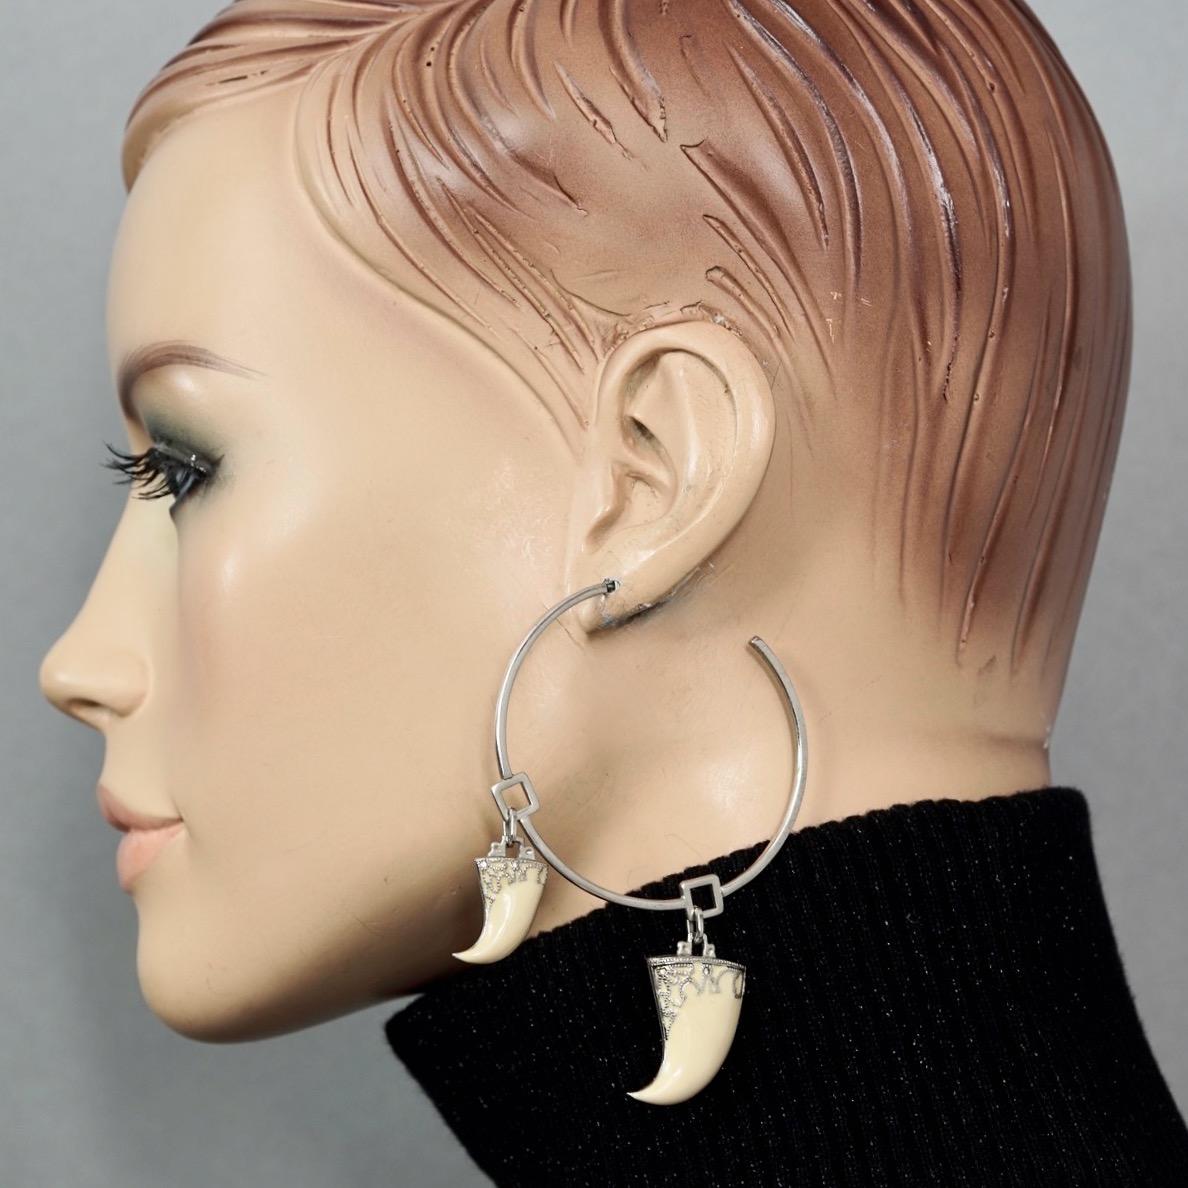 Vintage CHRISTIAN DIOR by John Galliano Beige Claw Charm Hoop Earrings

Measurements:
Height: 3.23 inches (8.2 cm) with claw charm
Diameter: 2.16 inches (5.5 cm)
Weight per Earring: 15 grams

Features:
- 100% Authentic CHRISTIAN DIOR.
- Hoop